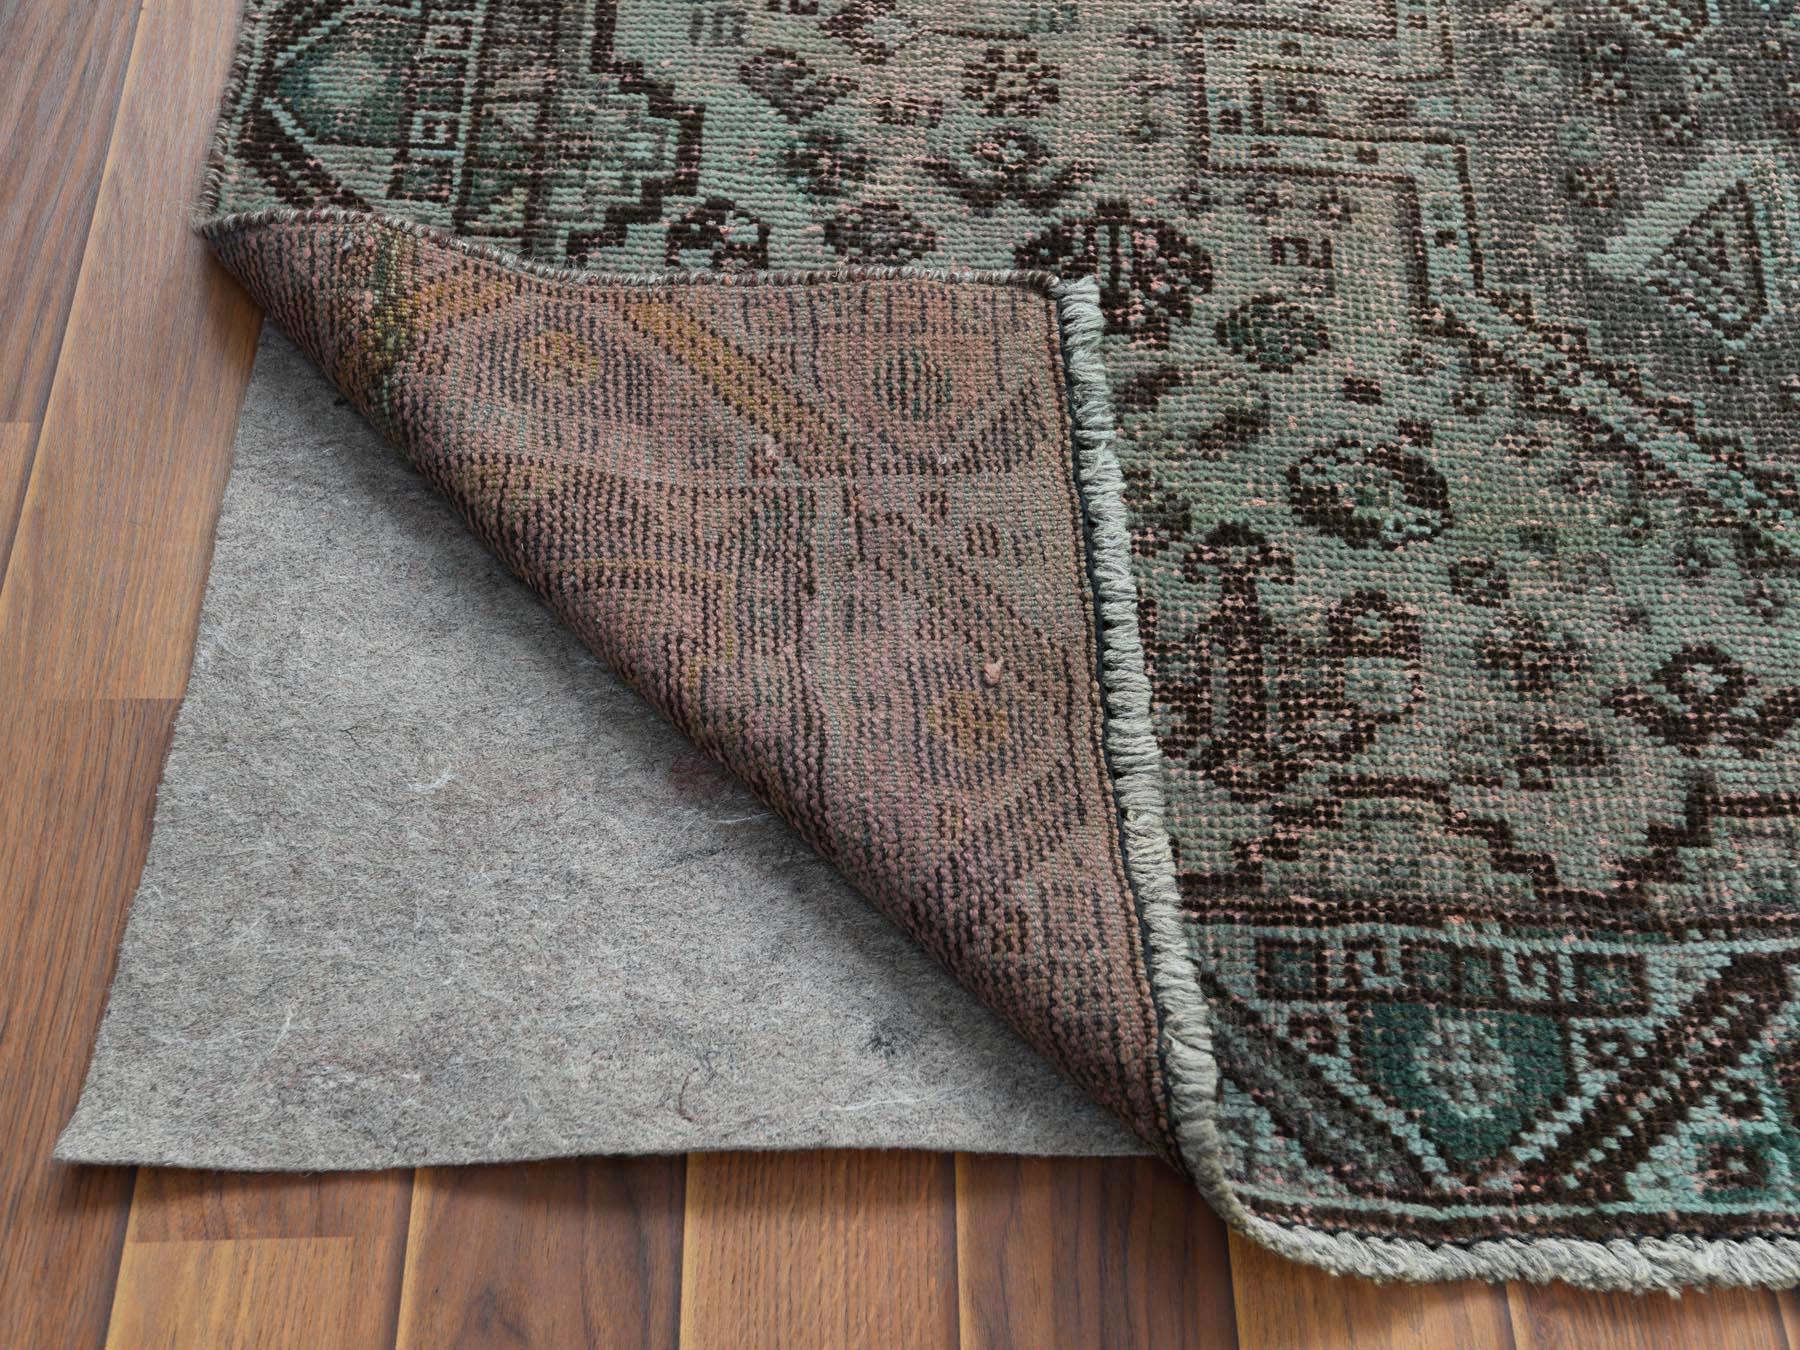 Medieval Old Gray Persian Shiraz with Triple Medallion Worn Down Hand Knotted Wool Rug For Sale